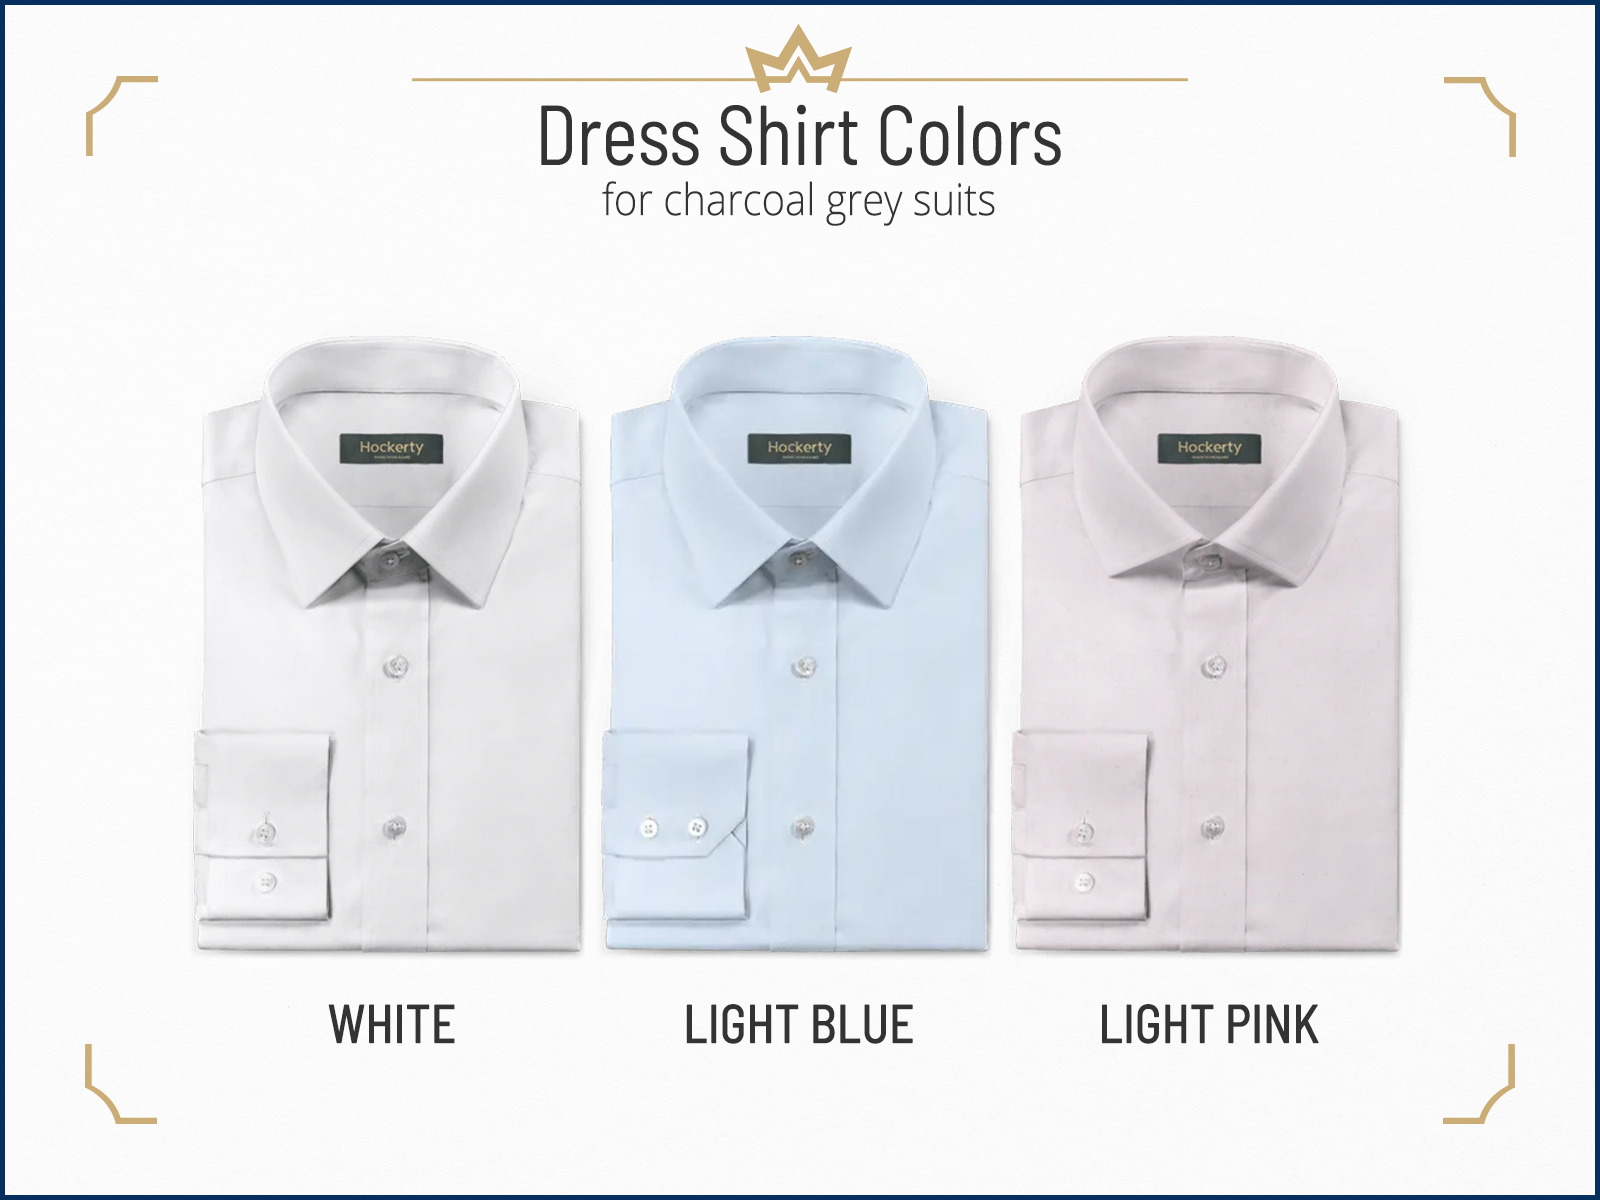 Recommended dress shirt colors for charcoal grey suits